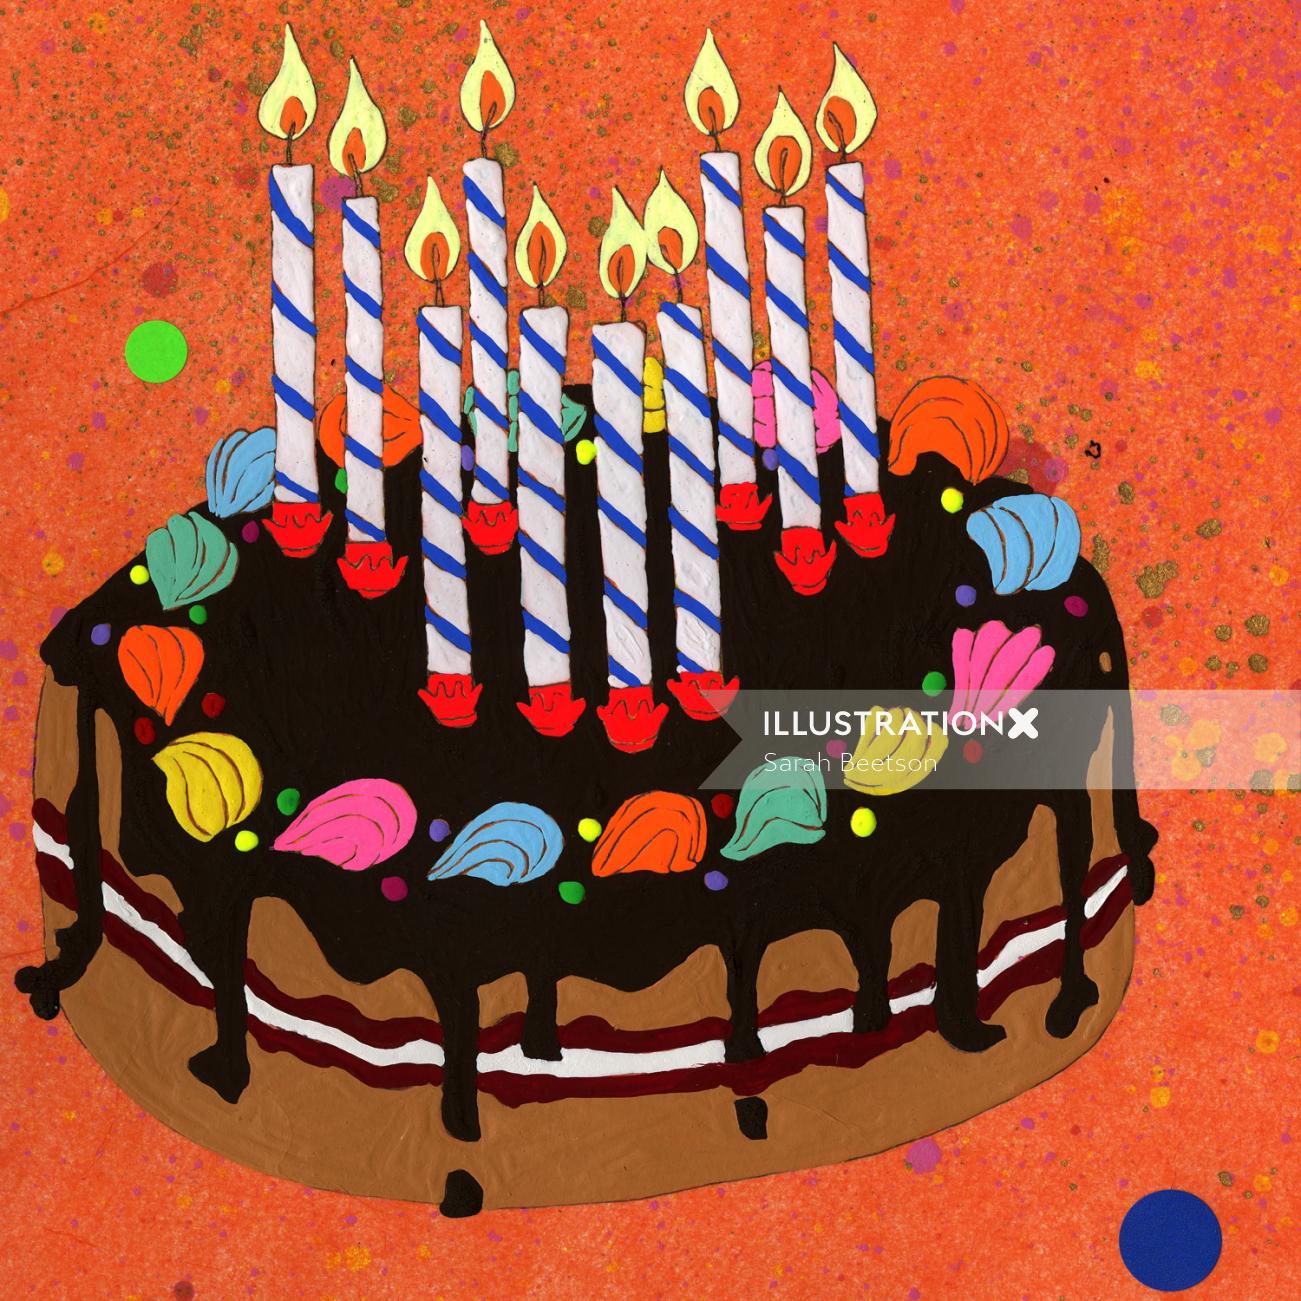 Birthday cake with candles - An illustration by Sarah Beetson